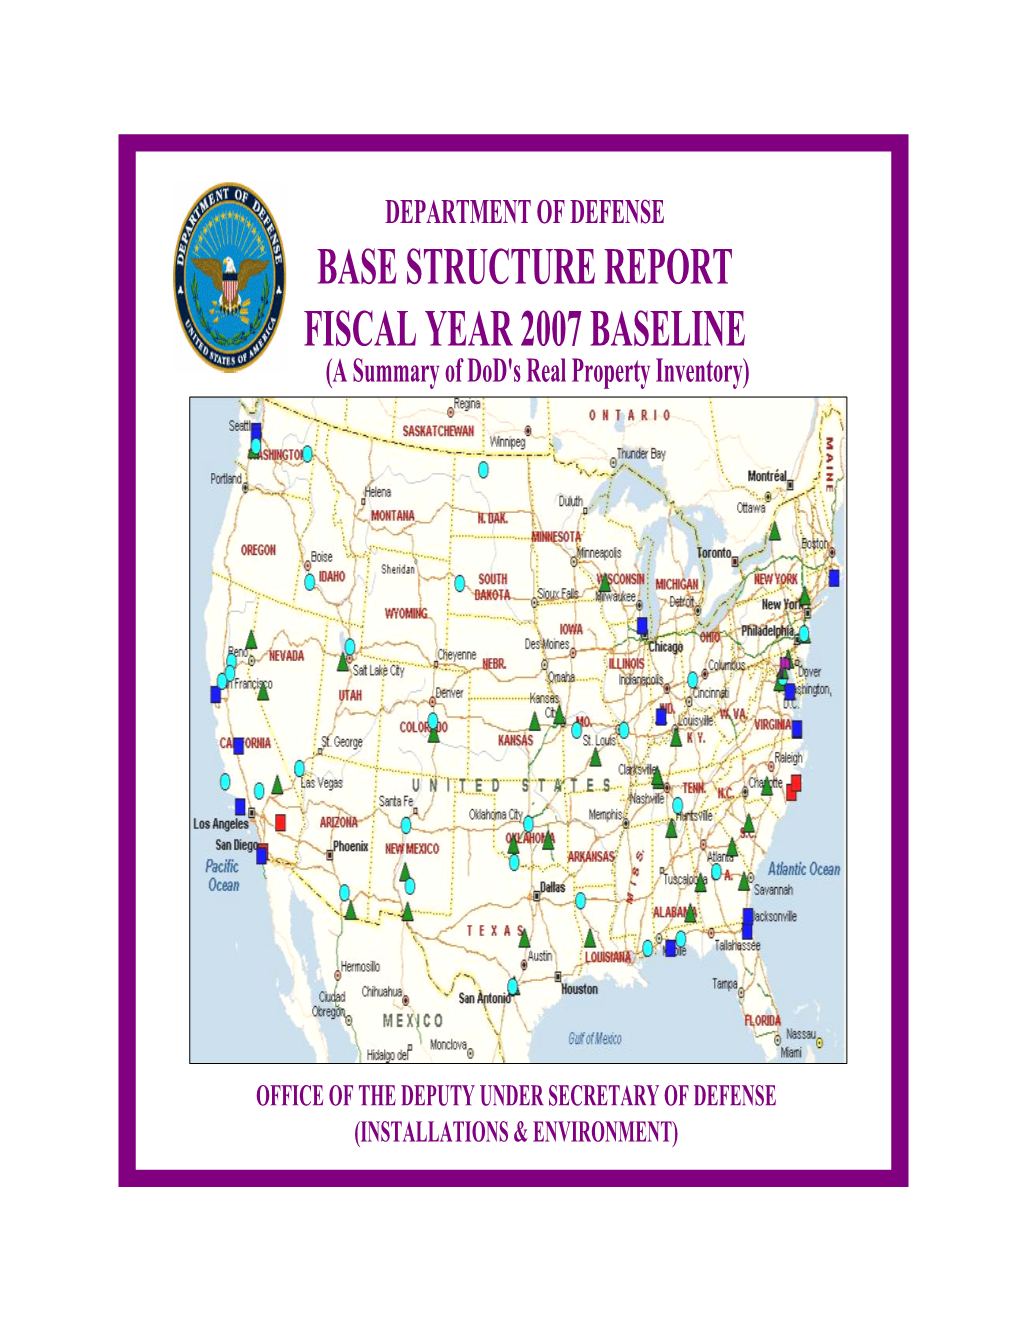 BASE STRUCTURE REPORT FISCAL YEAR 2007 BASELINE (A Summary of Dod's Real Property Inventory)